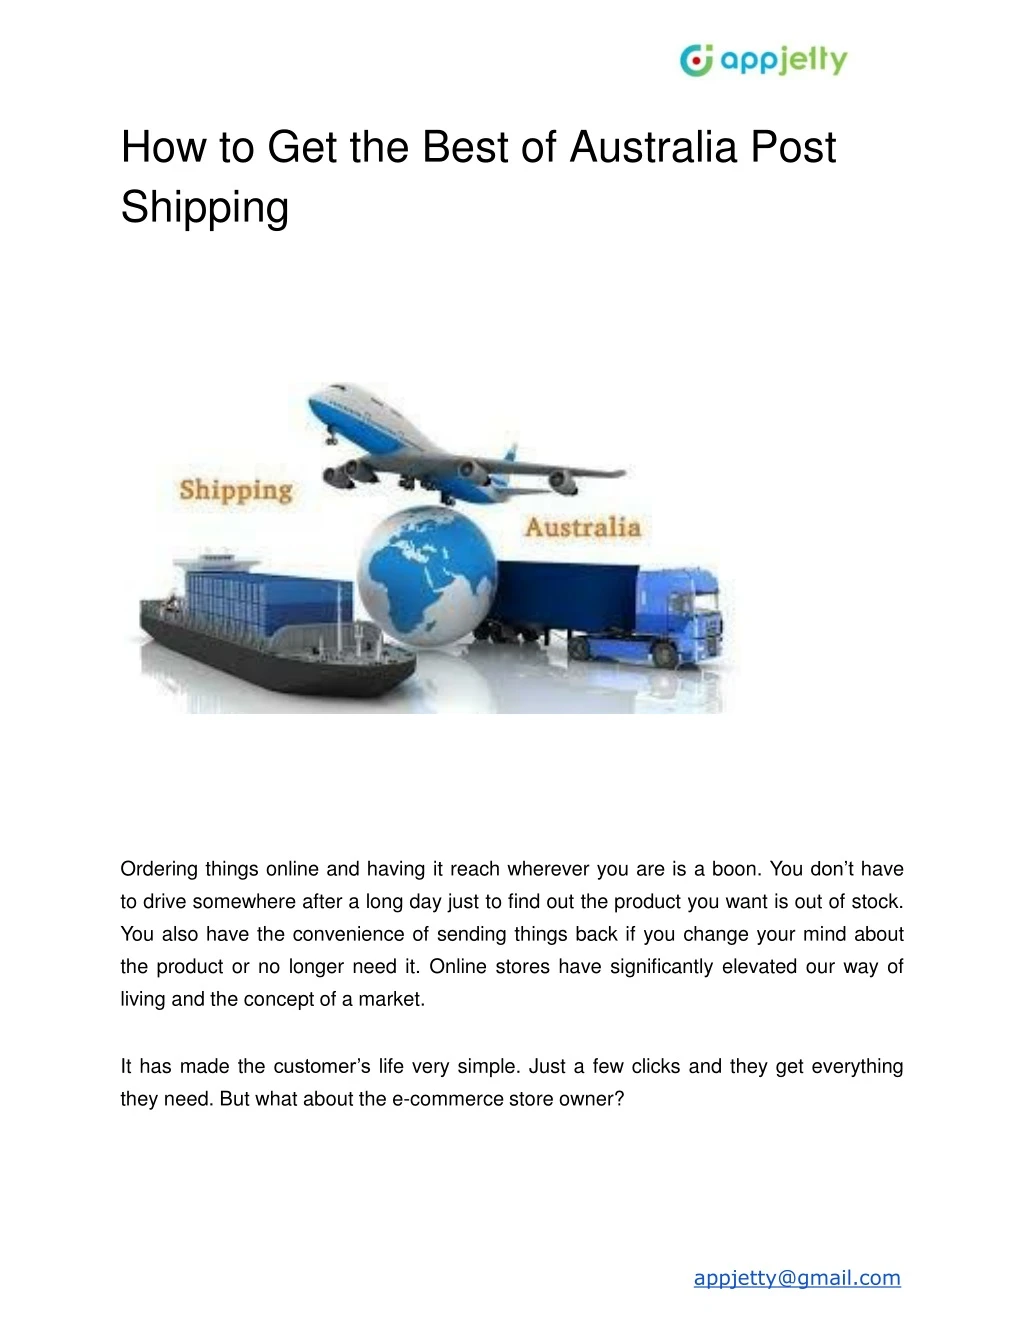 how to get the best of australia post shipping